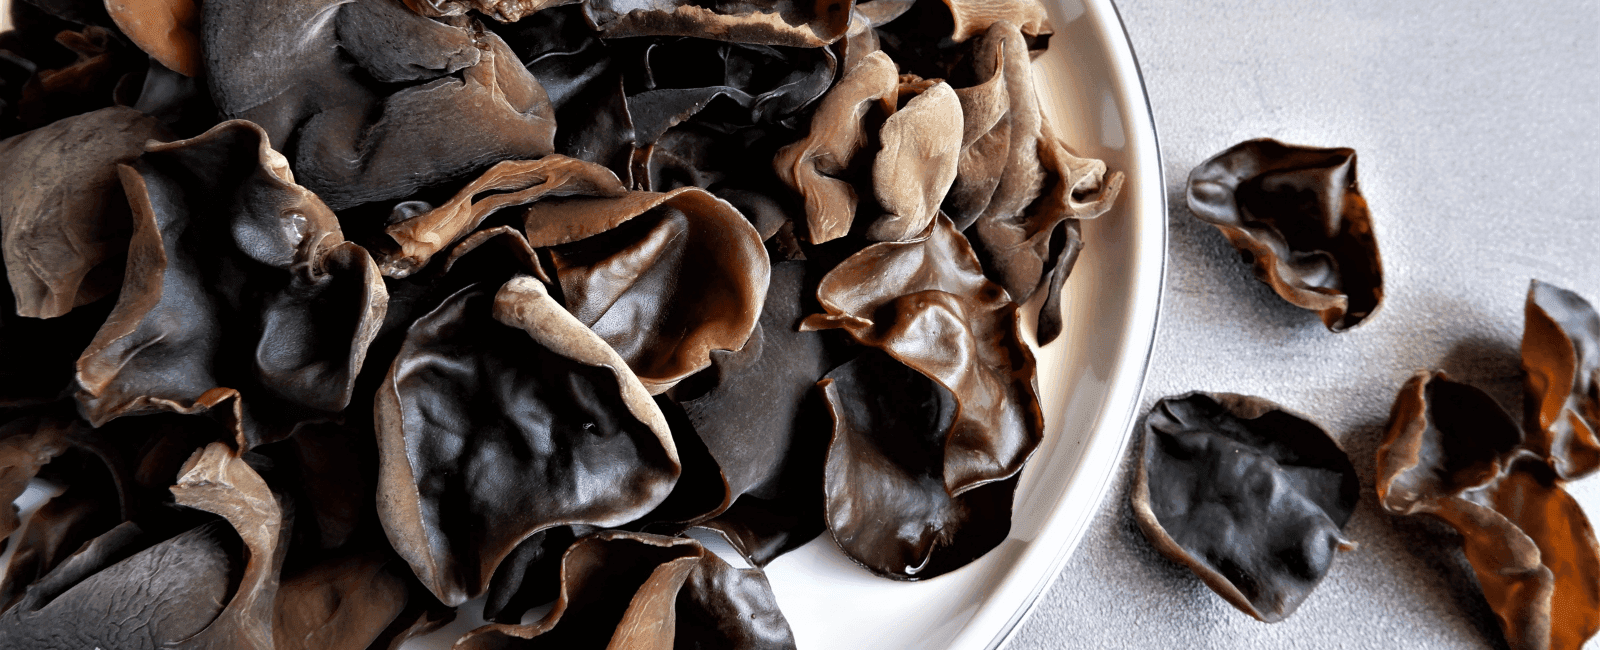 11 Wood Ear Mushroom Recipes for the Home Cook